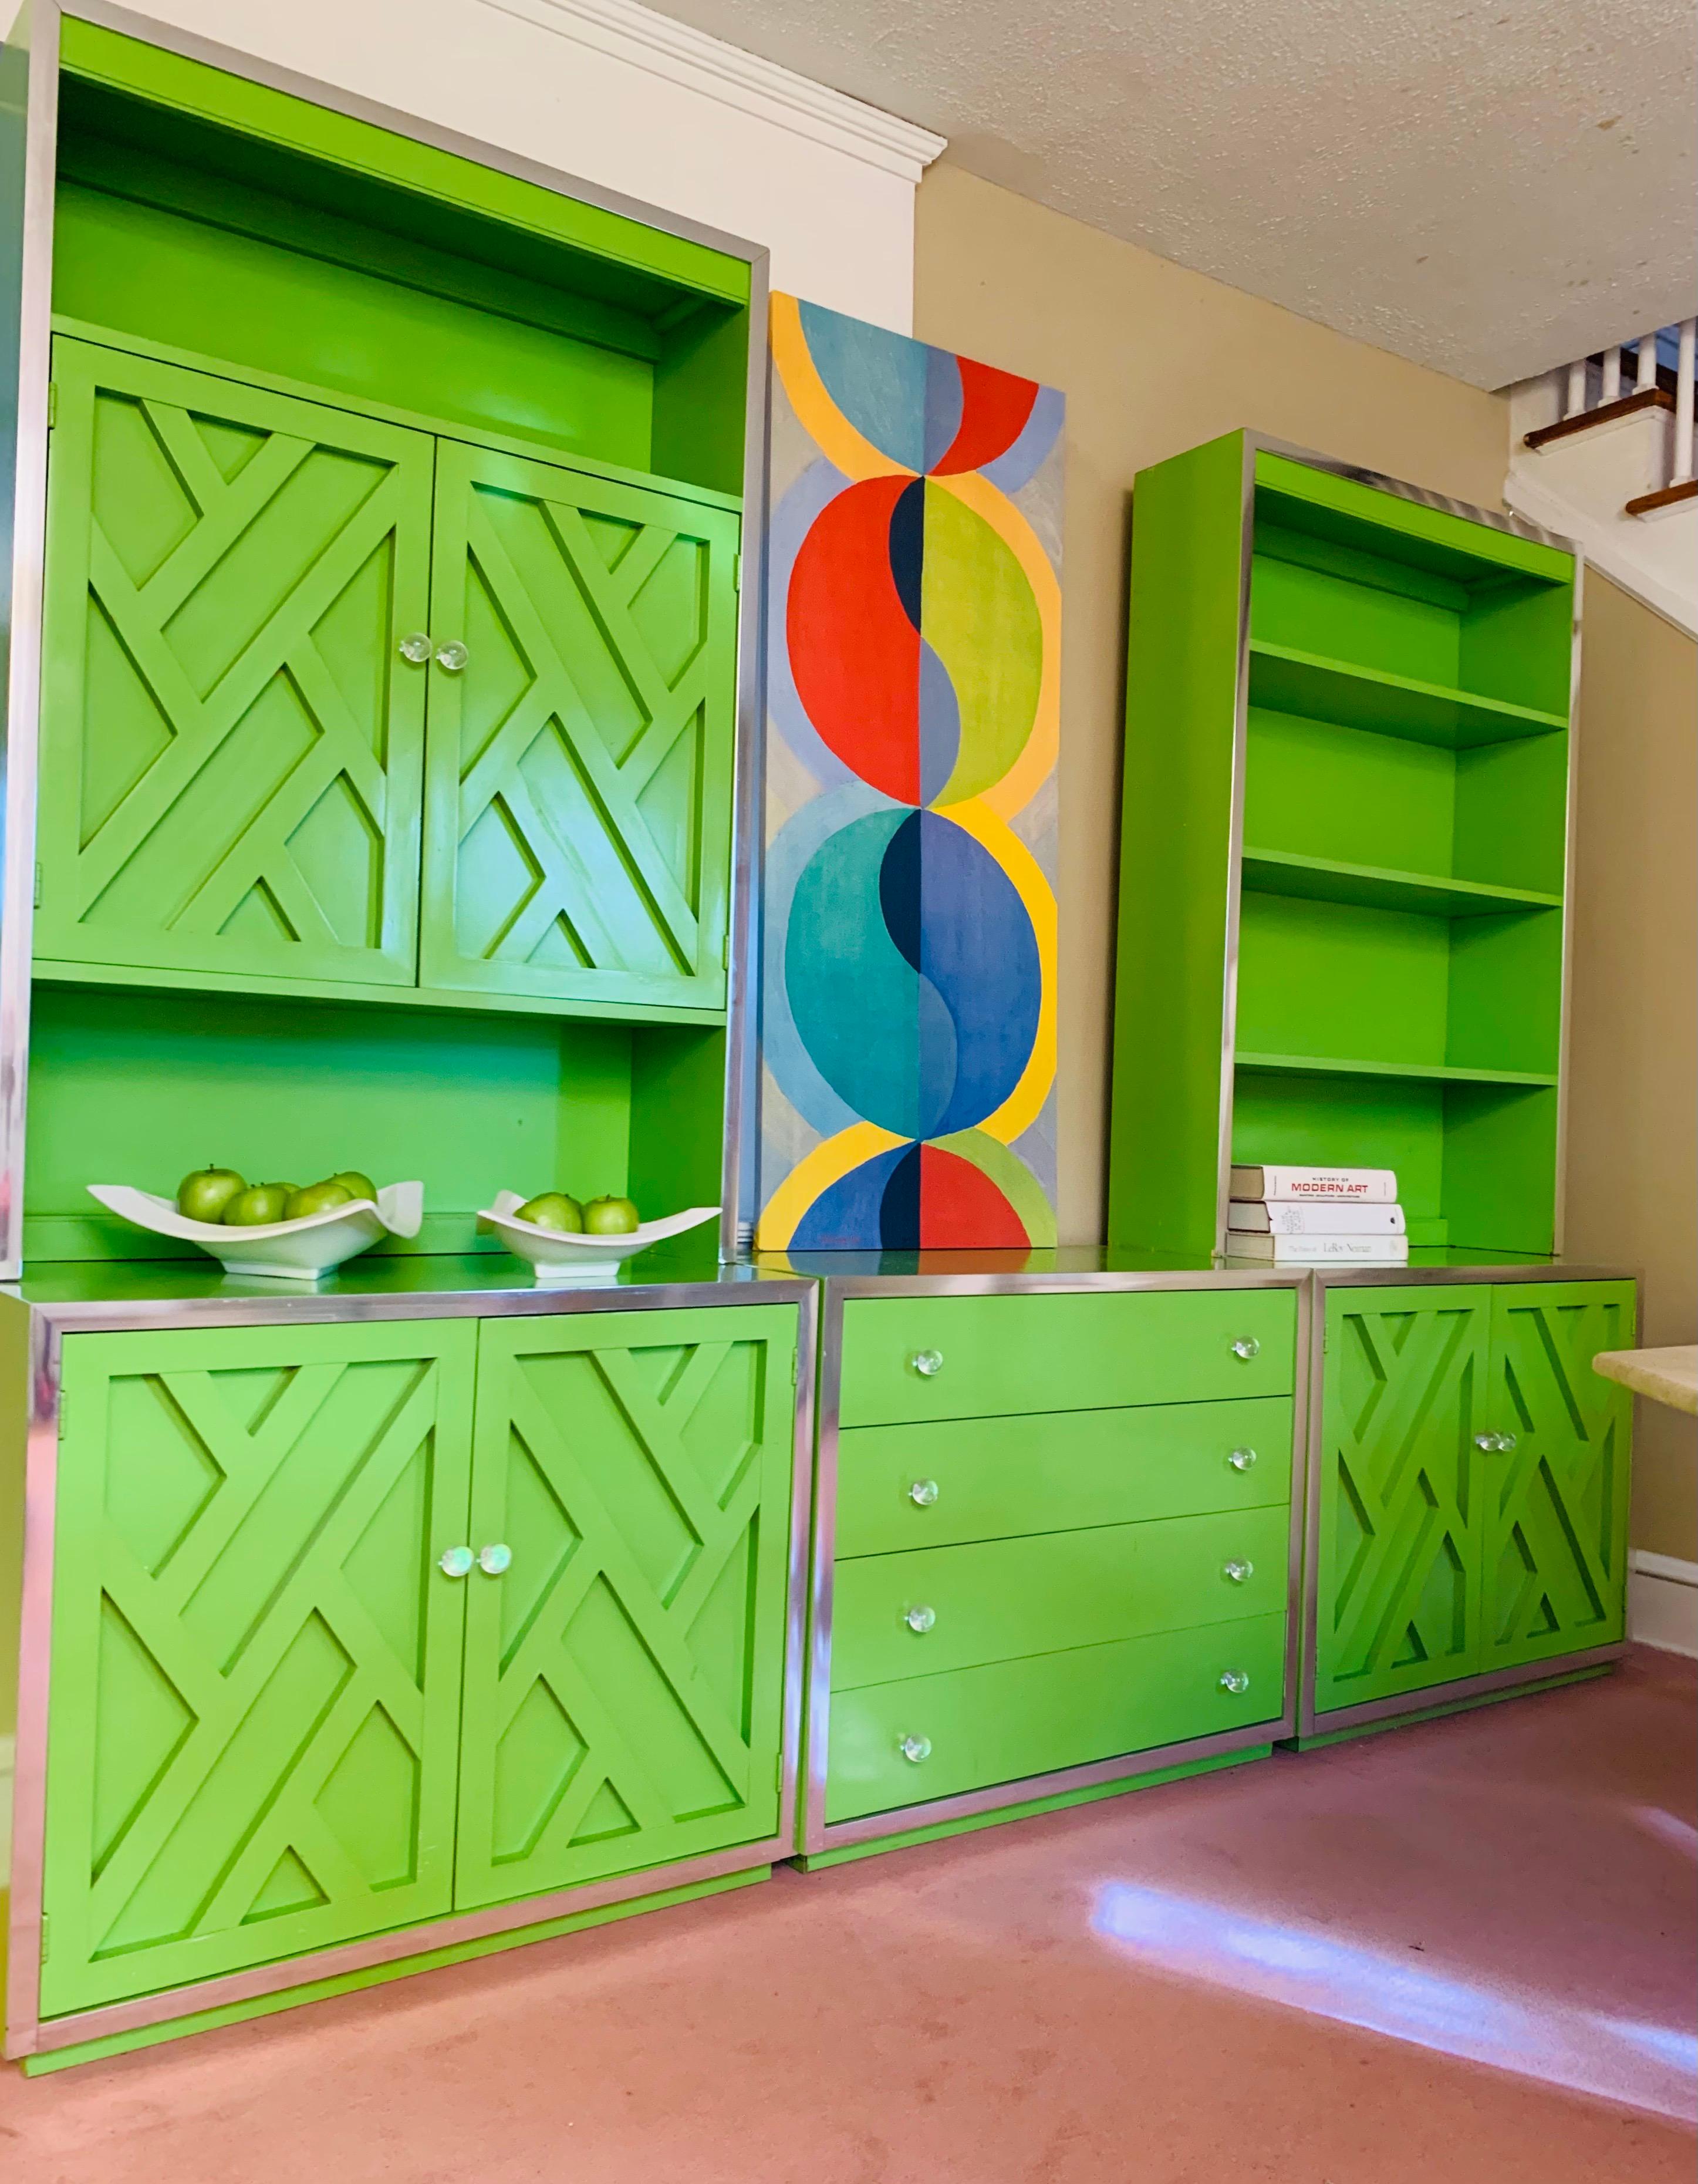 North American Green Lacquered Wall Unit by Henredon Furniture, 1970's, American